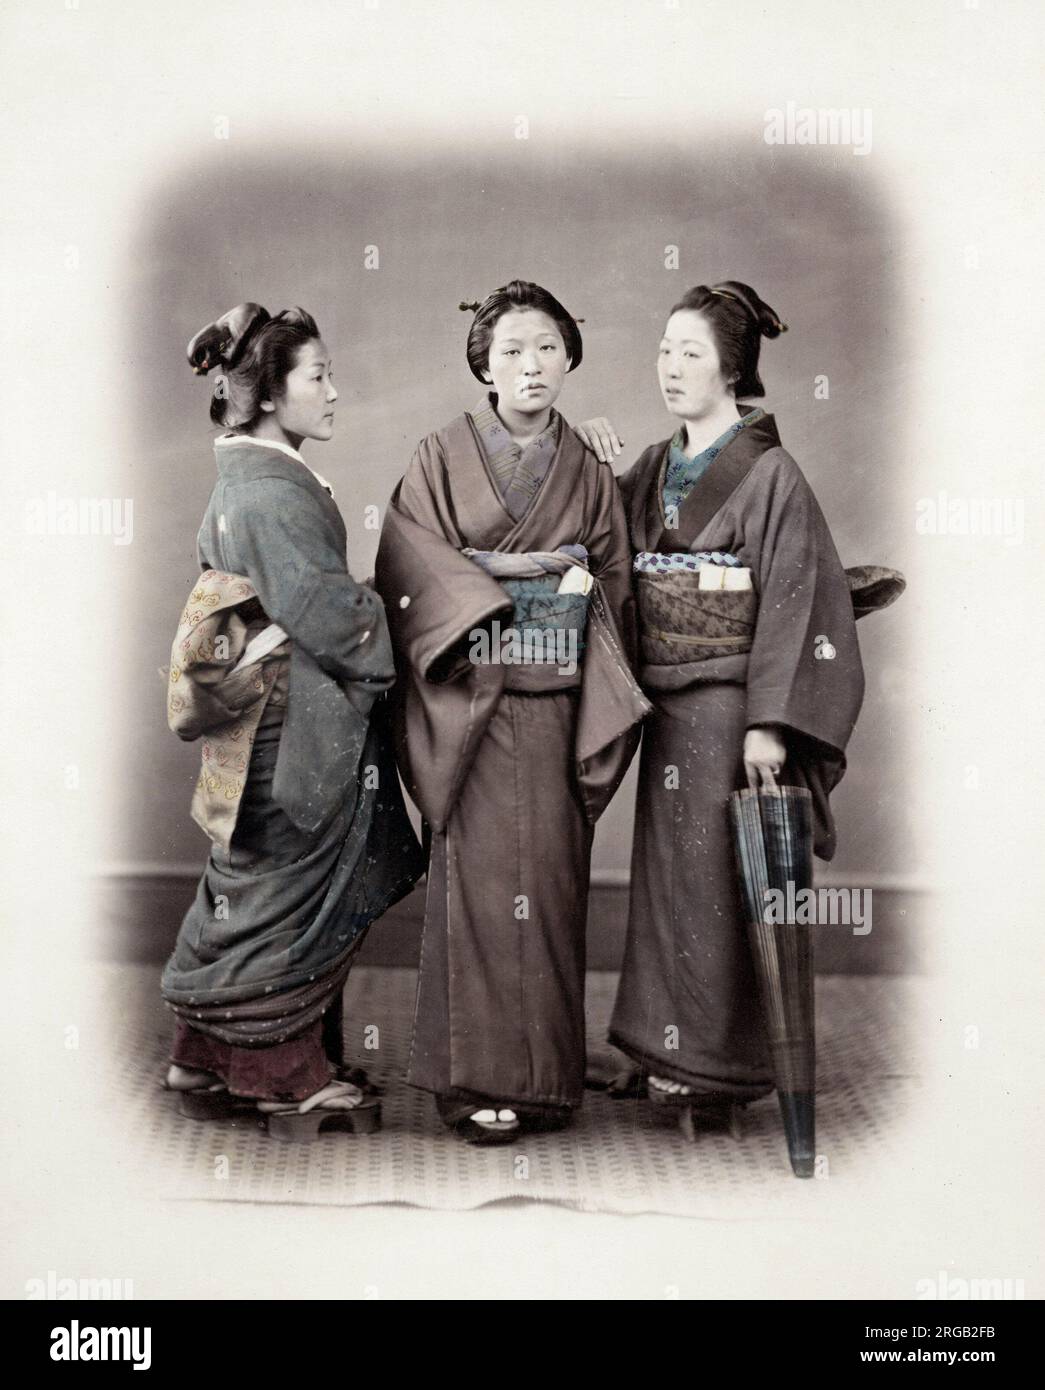 1860's Japan - portrait of three young women 'The Three Graces' Felice or Felix Beato (1832 - 29 January 1909),  Italian-British photographer working mostly in India, Japan, China Stock Photo